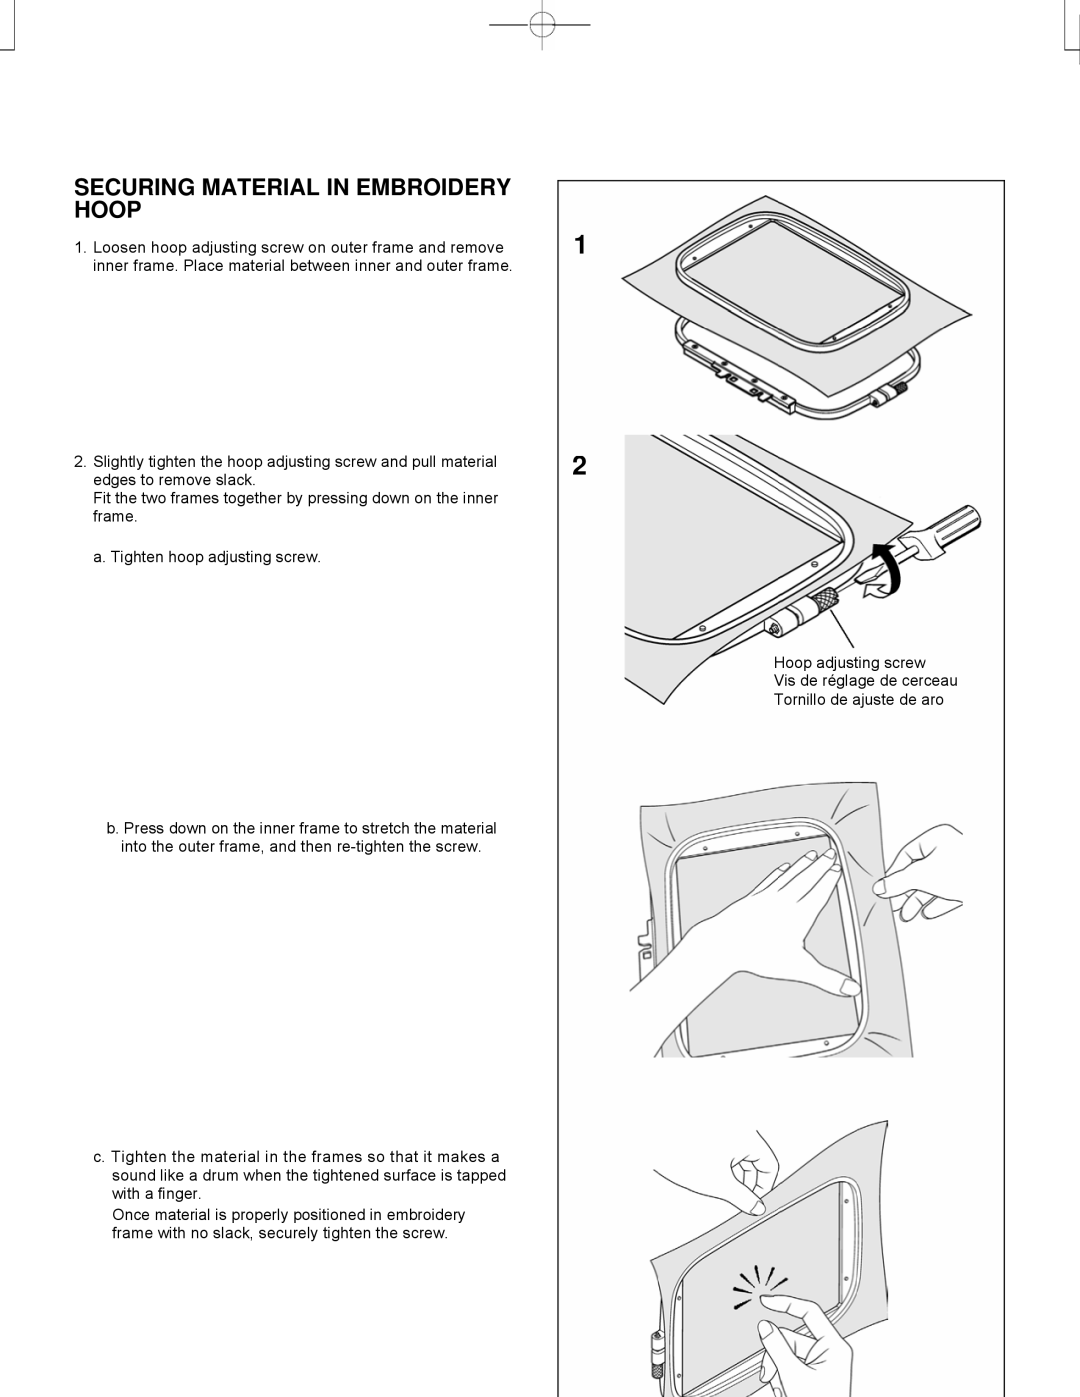 Singer CE-150 instruction manual Securing Material in Embroidery Hoop 